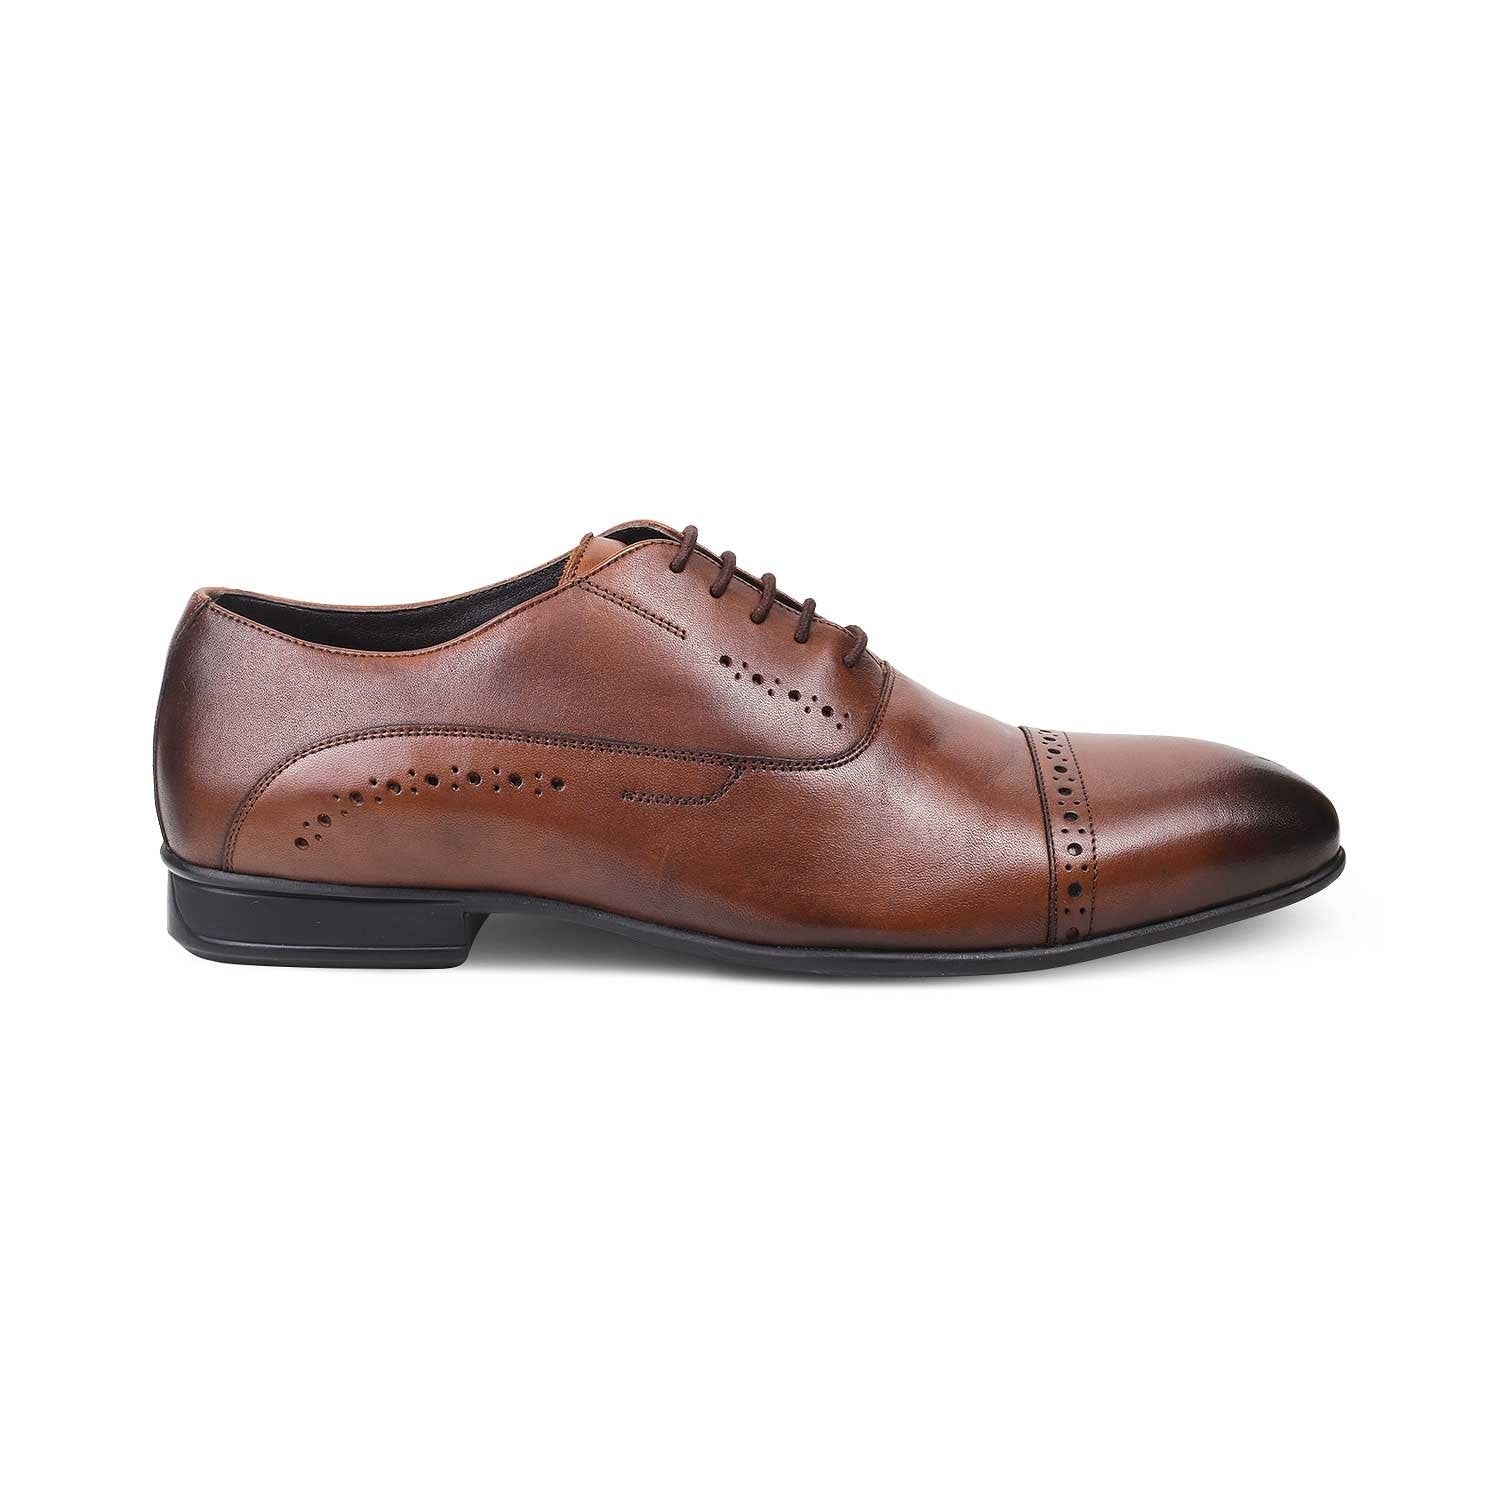 The Togford Brown Men's Oxford Lace Ups Tresmode